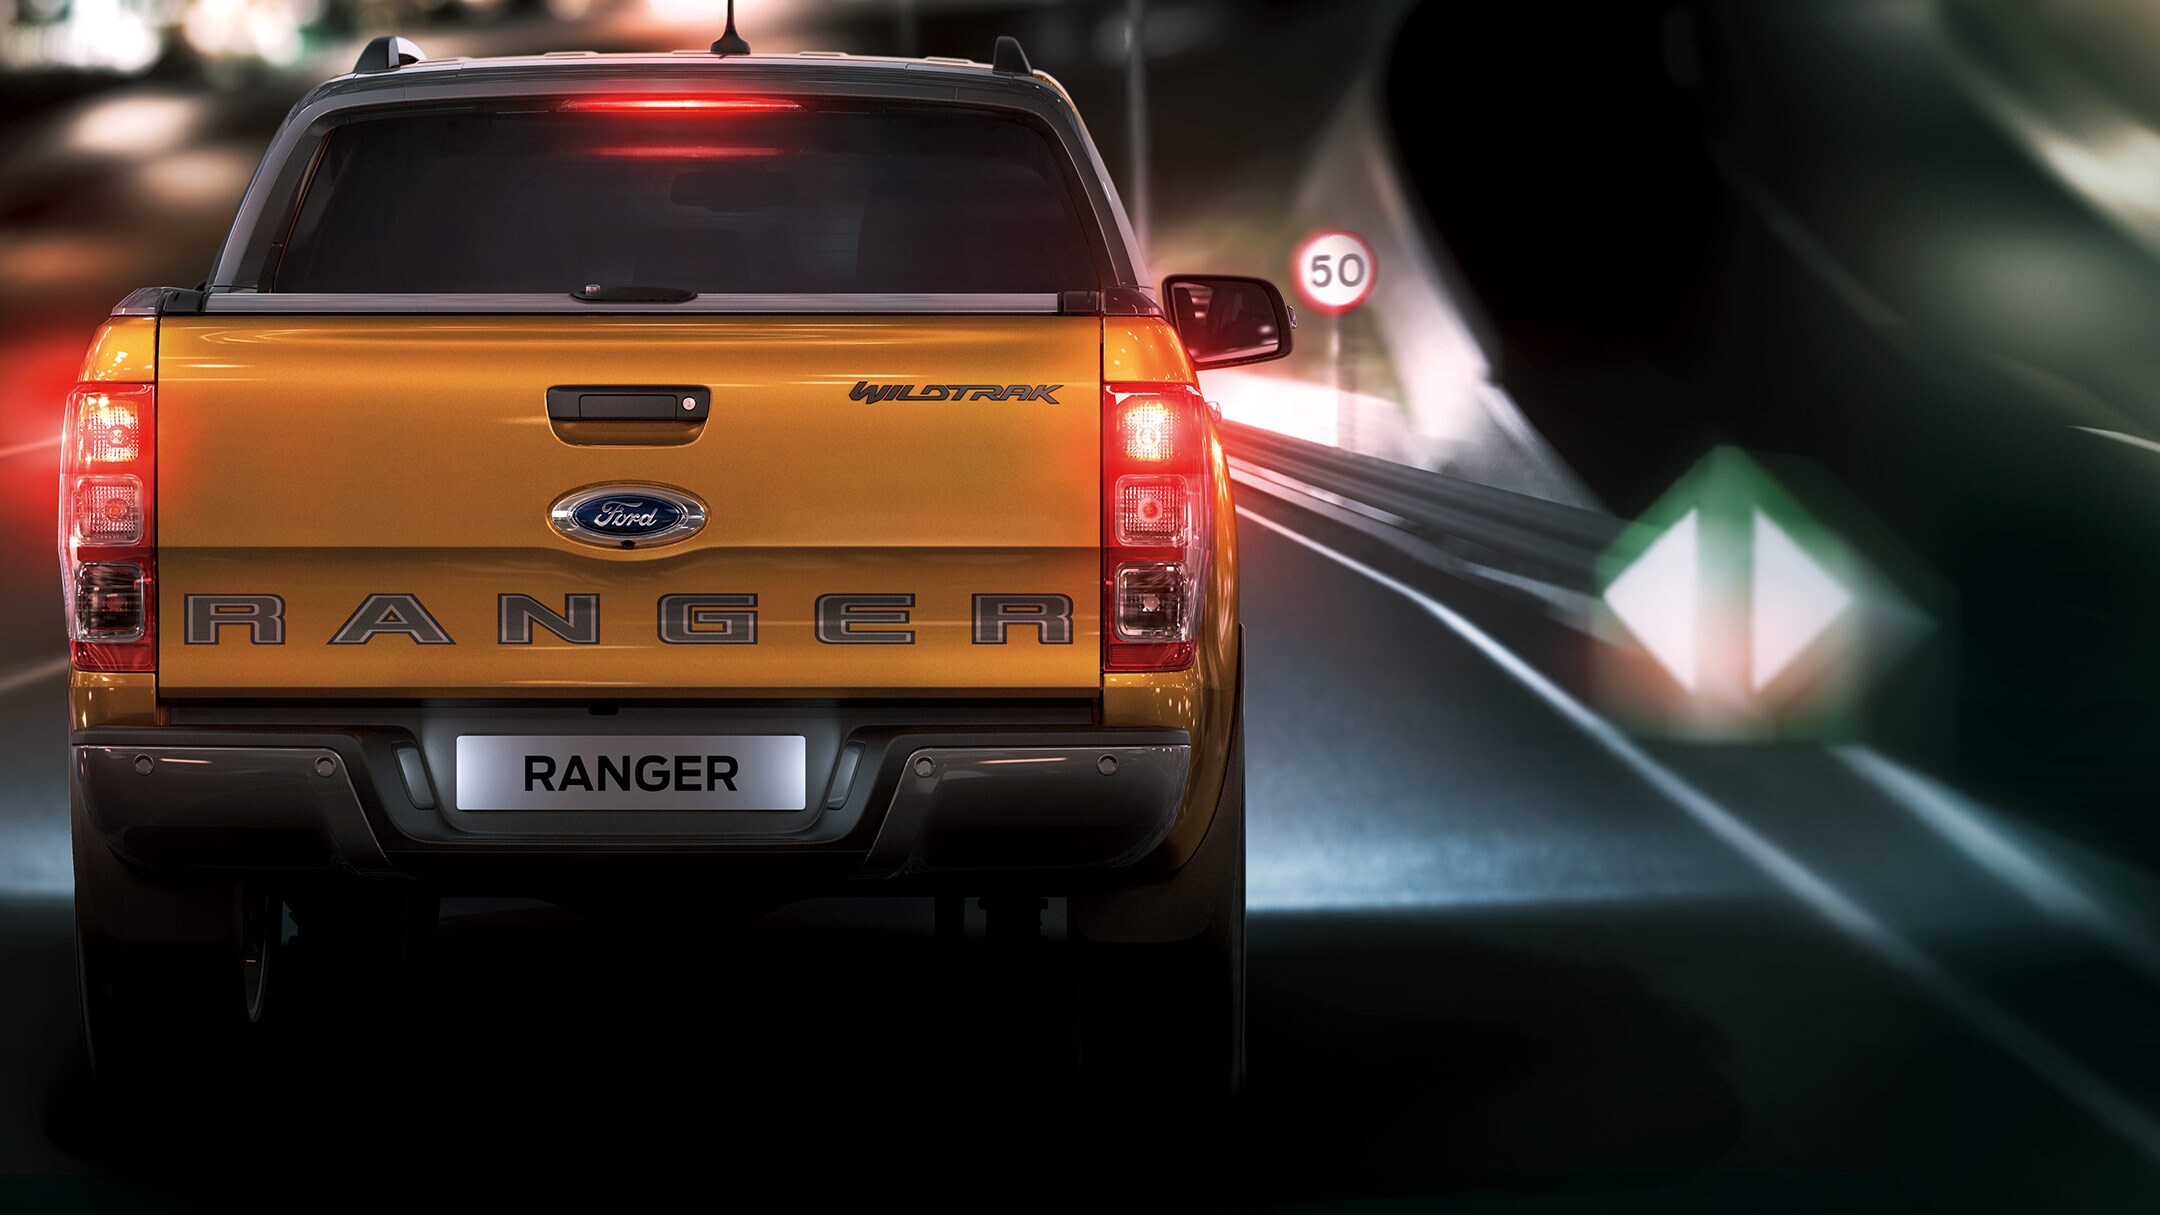 Orange Ford Ranger rear view with traffic sign recognition